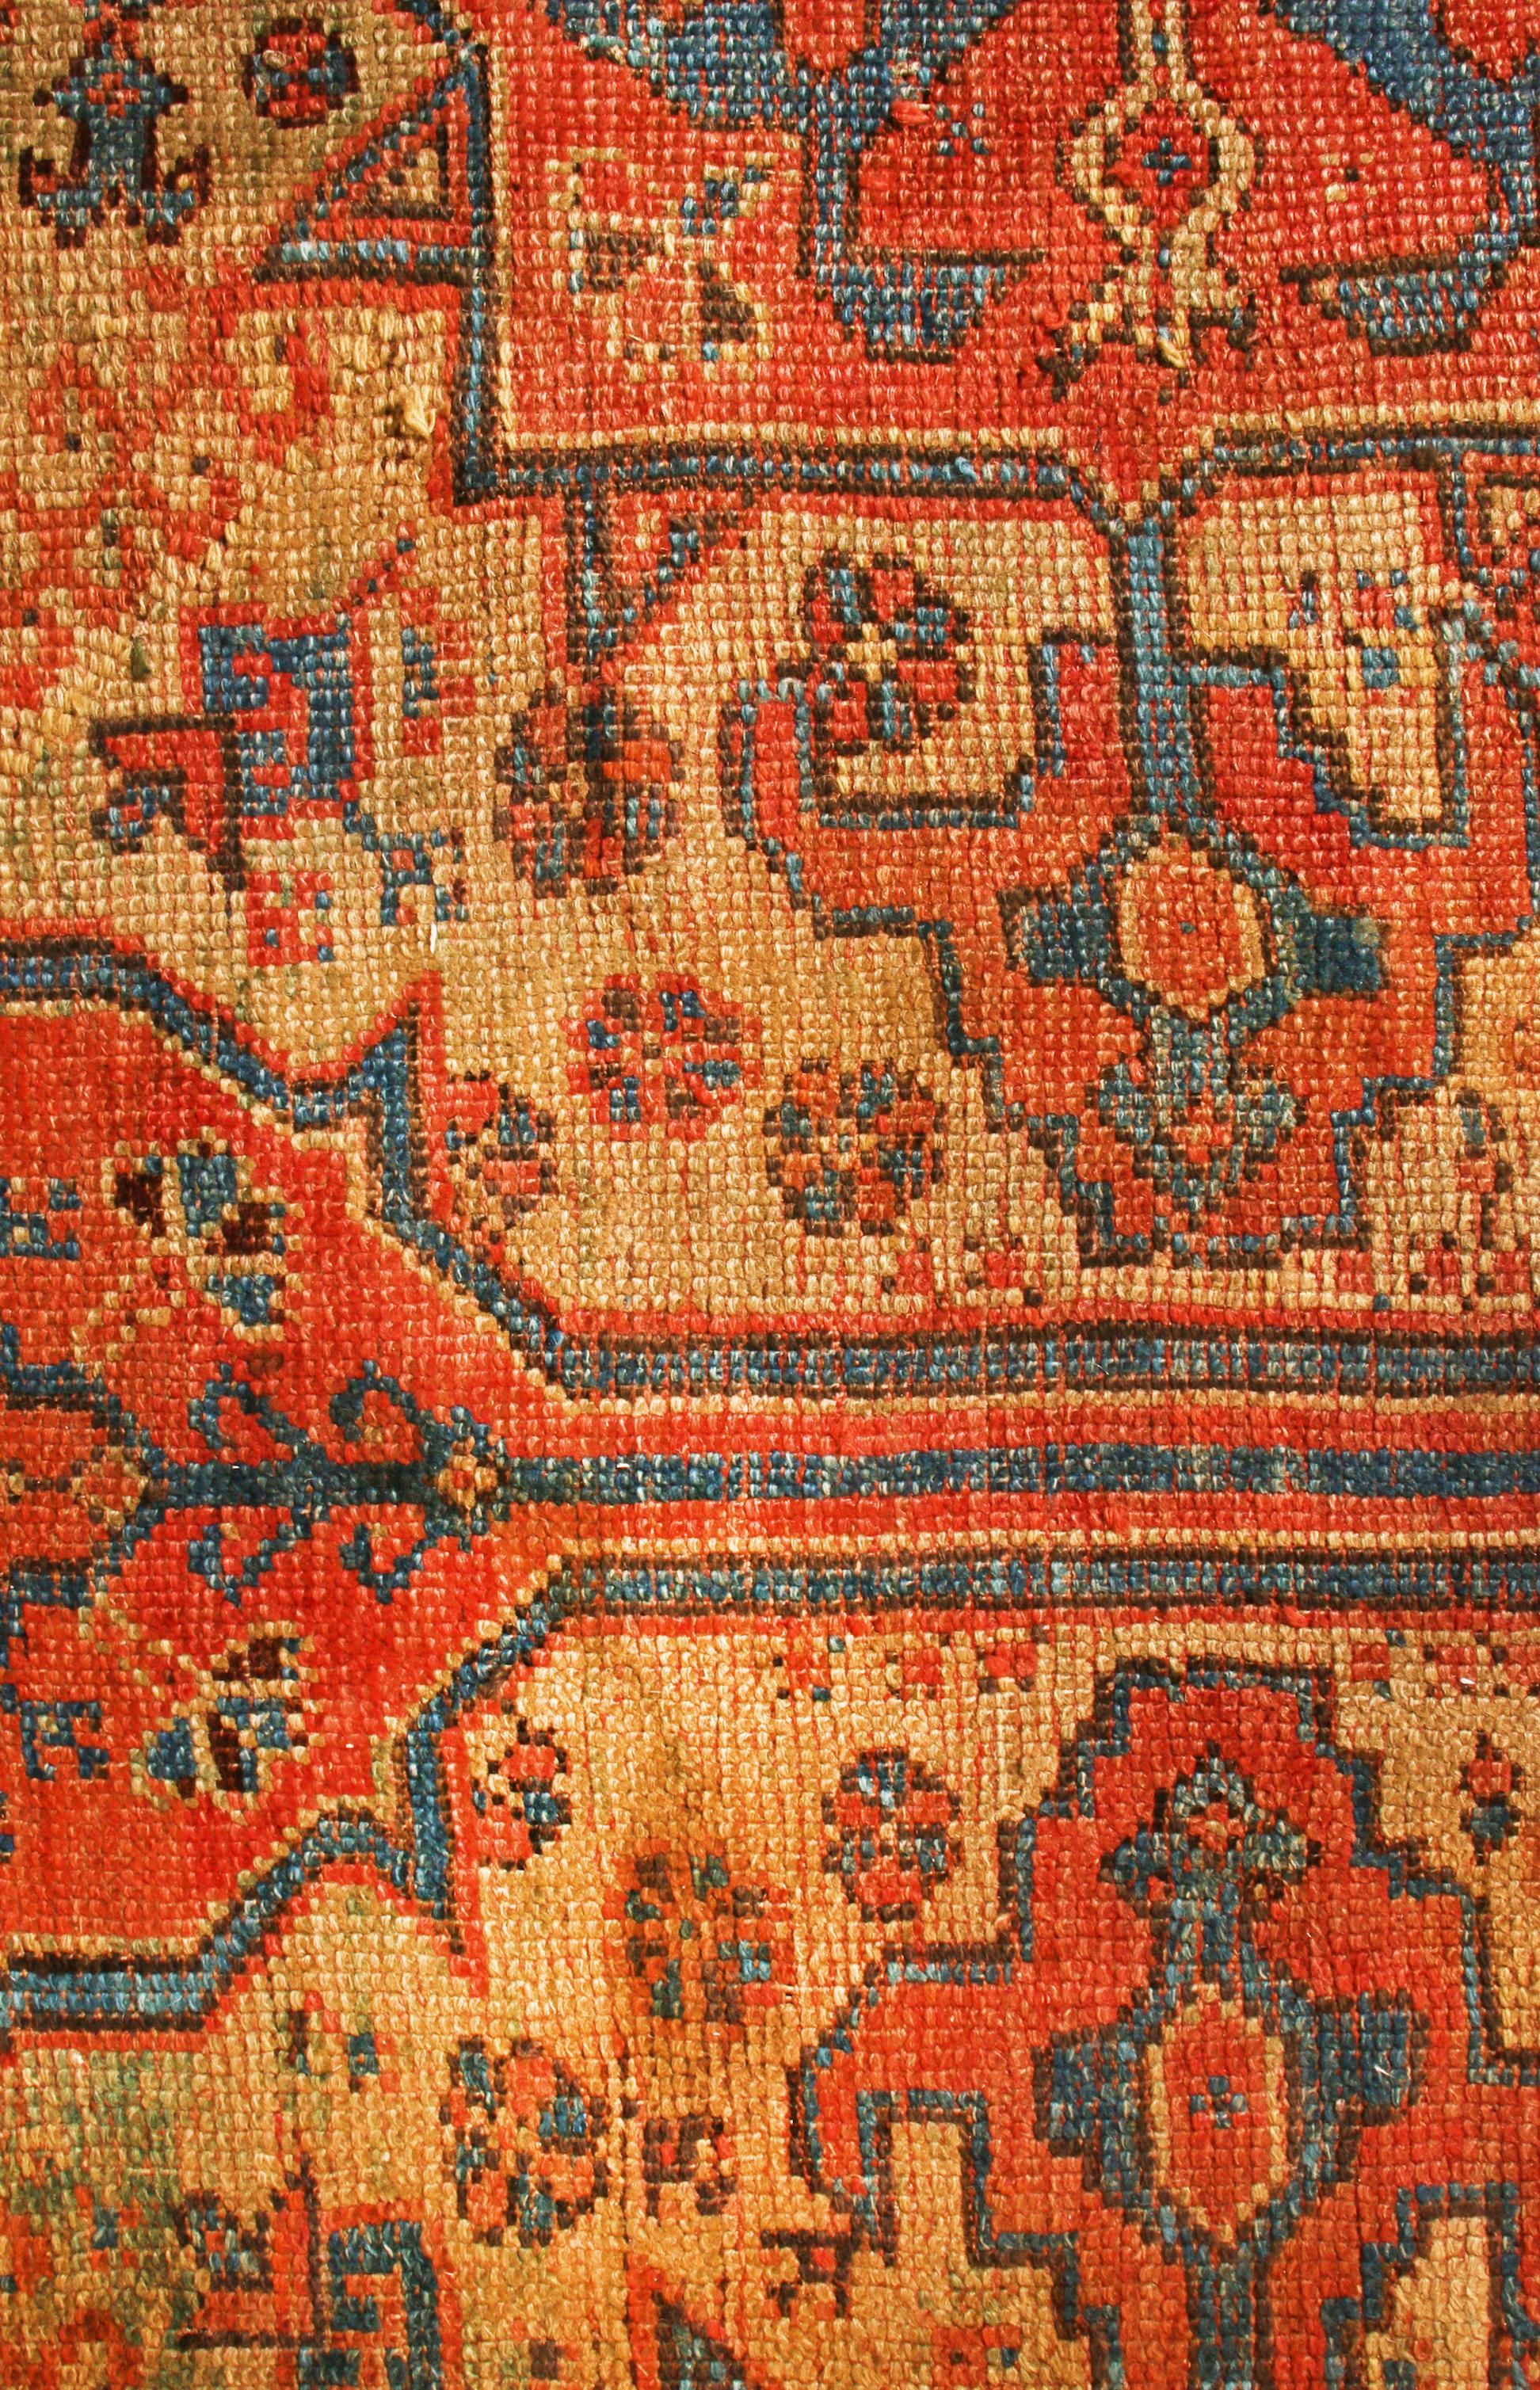 Originating from 18th century India, this antique traditional Oushak rug has an expansive series of floral and gul imagery in a lustrous, hand knotted wool portrait. Featuring an especially unique colorway combination of bright sunset orange, beige